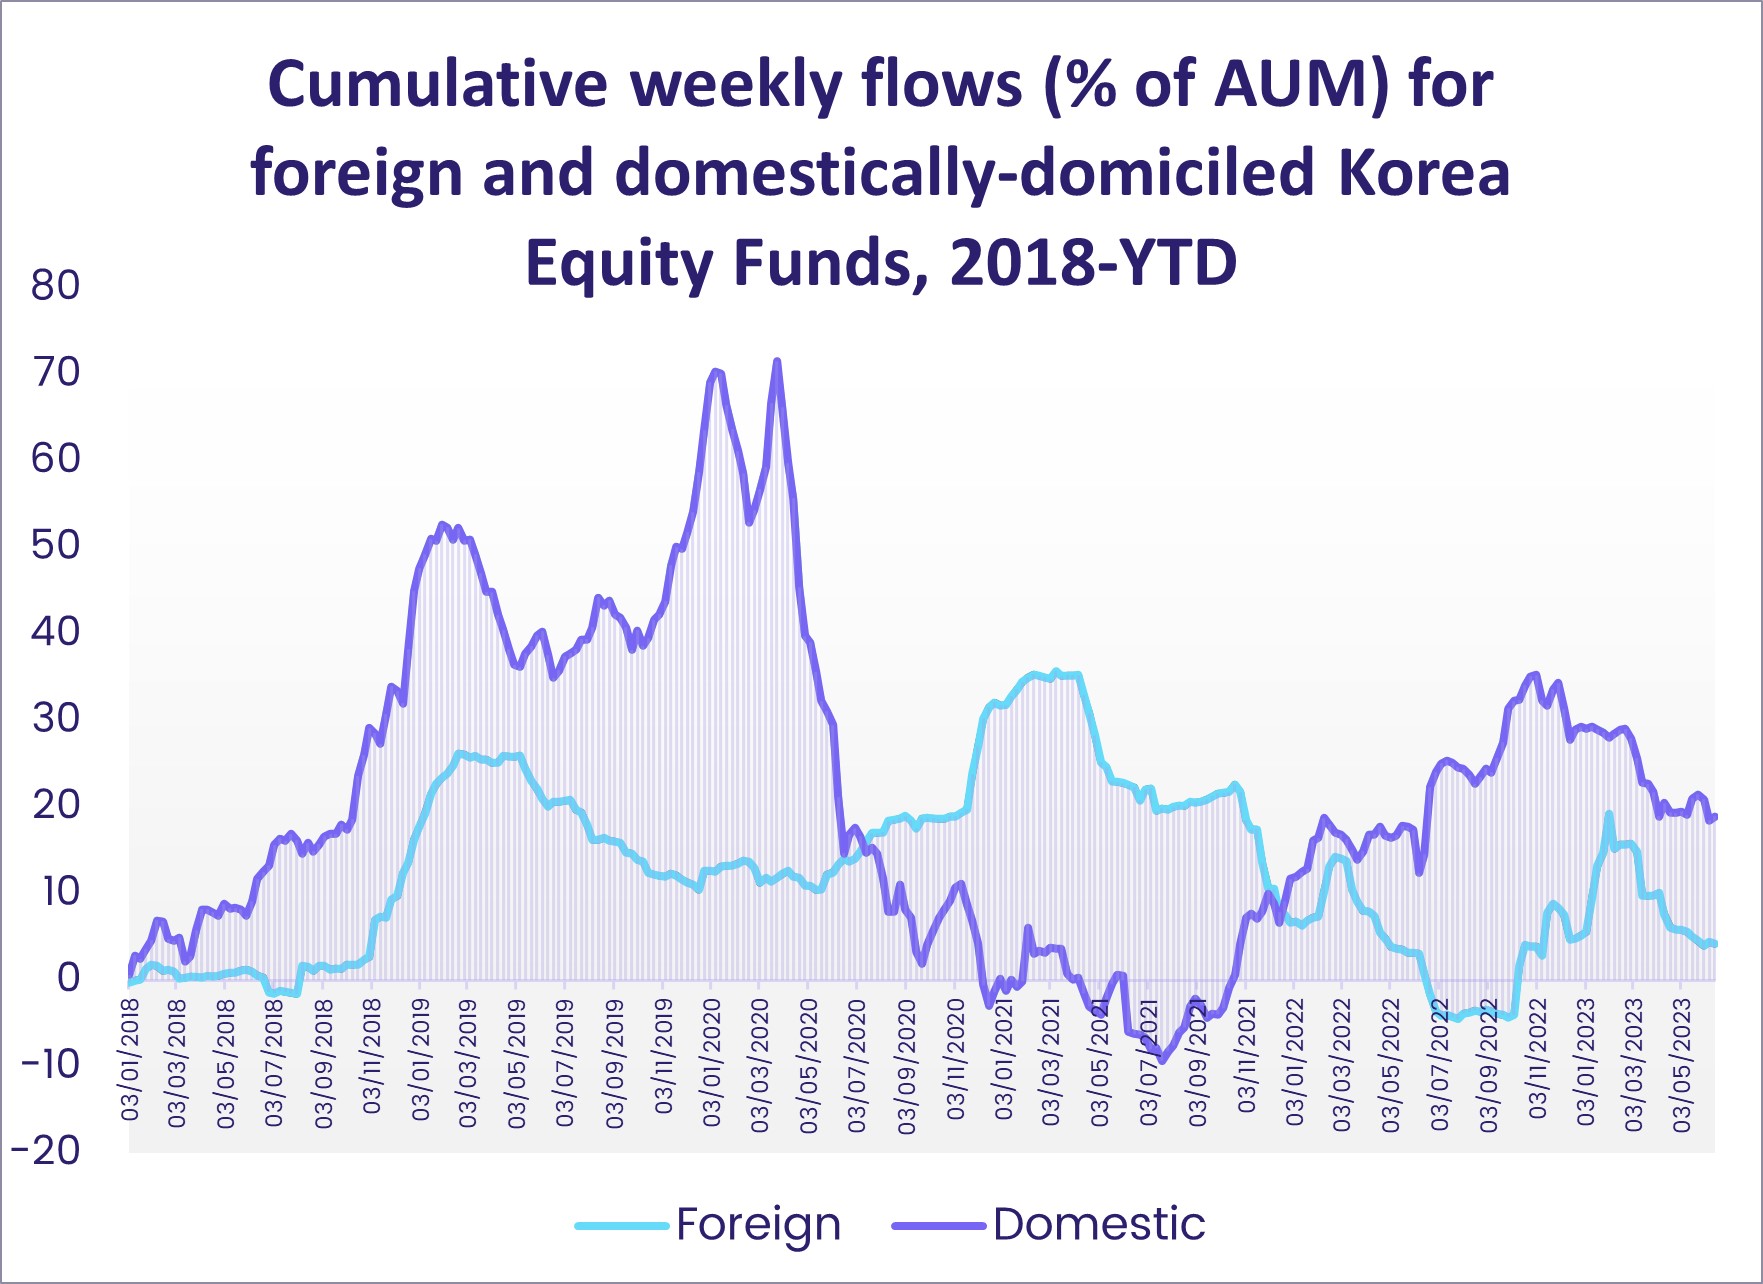 Image of a chart representing "Cumulative weekly flows (% of AUM) for foreign and domestically-domiciled Korea Equity Funds, 2018-YTD"